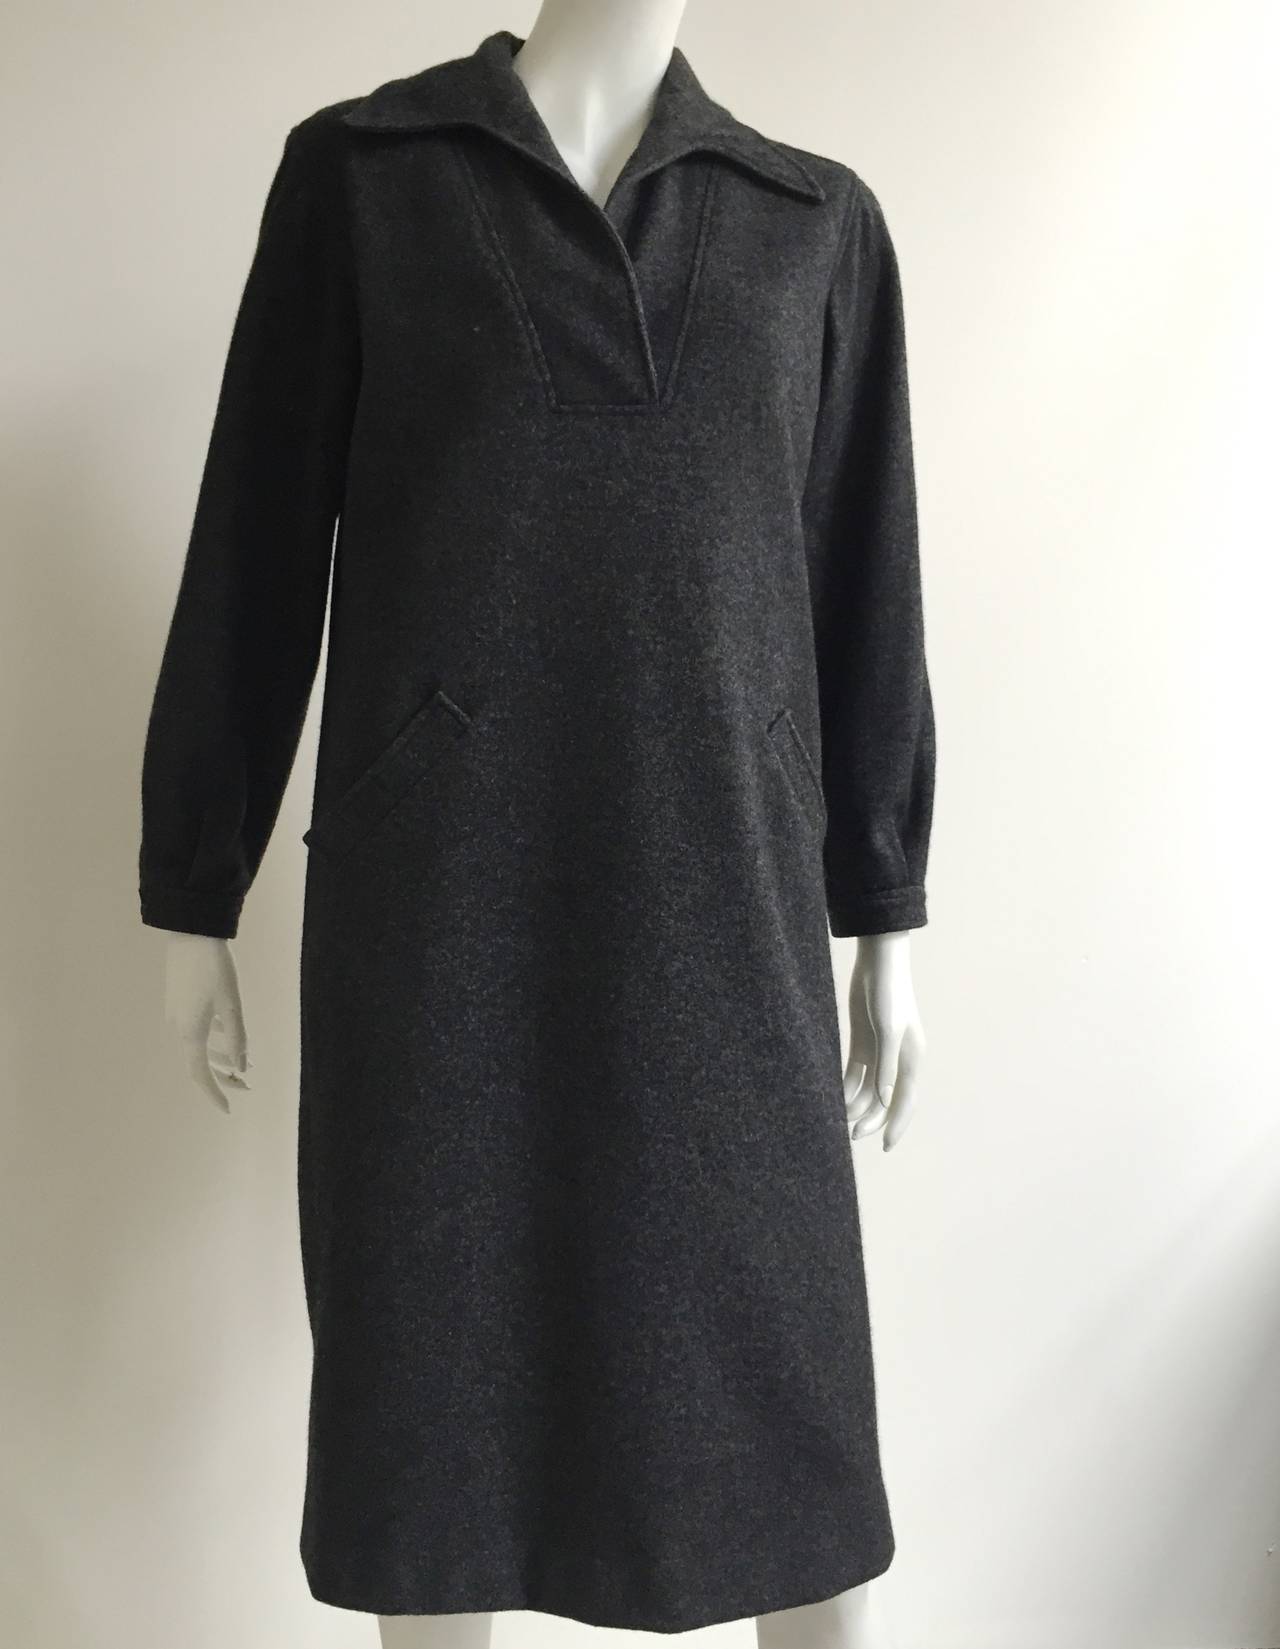 Halston 1970s thick gray wool dress with front pockets is a size 6/8. Dress is designed to be oversized, not form fitting. 
Dress is lined and made in the USA.
Measurements are:
41